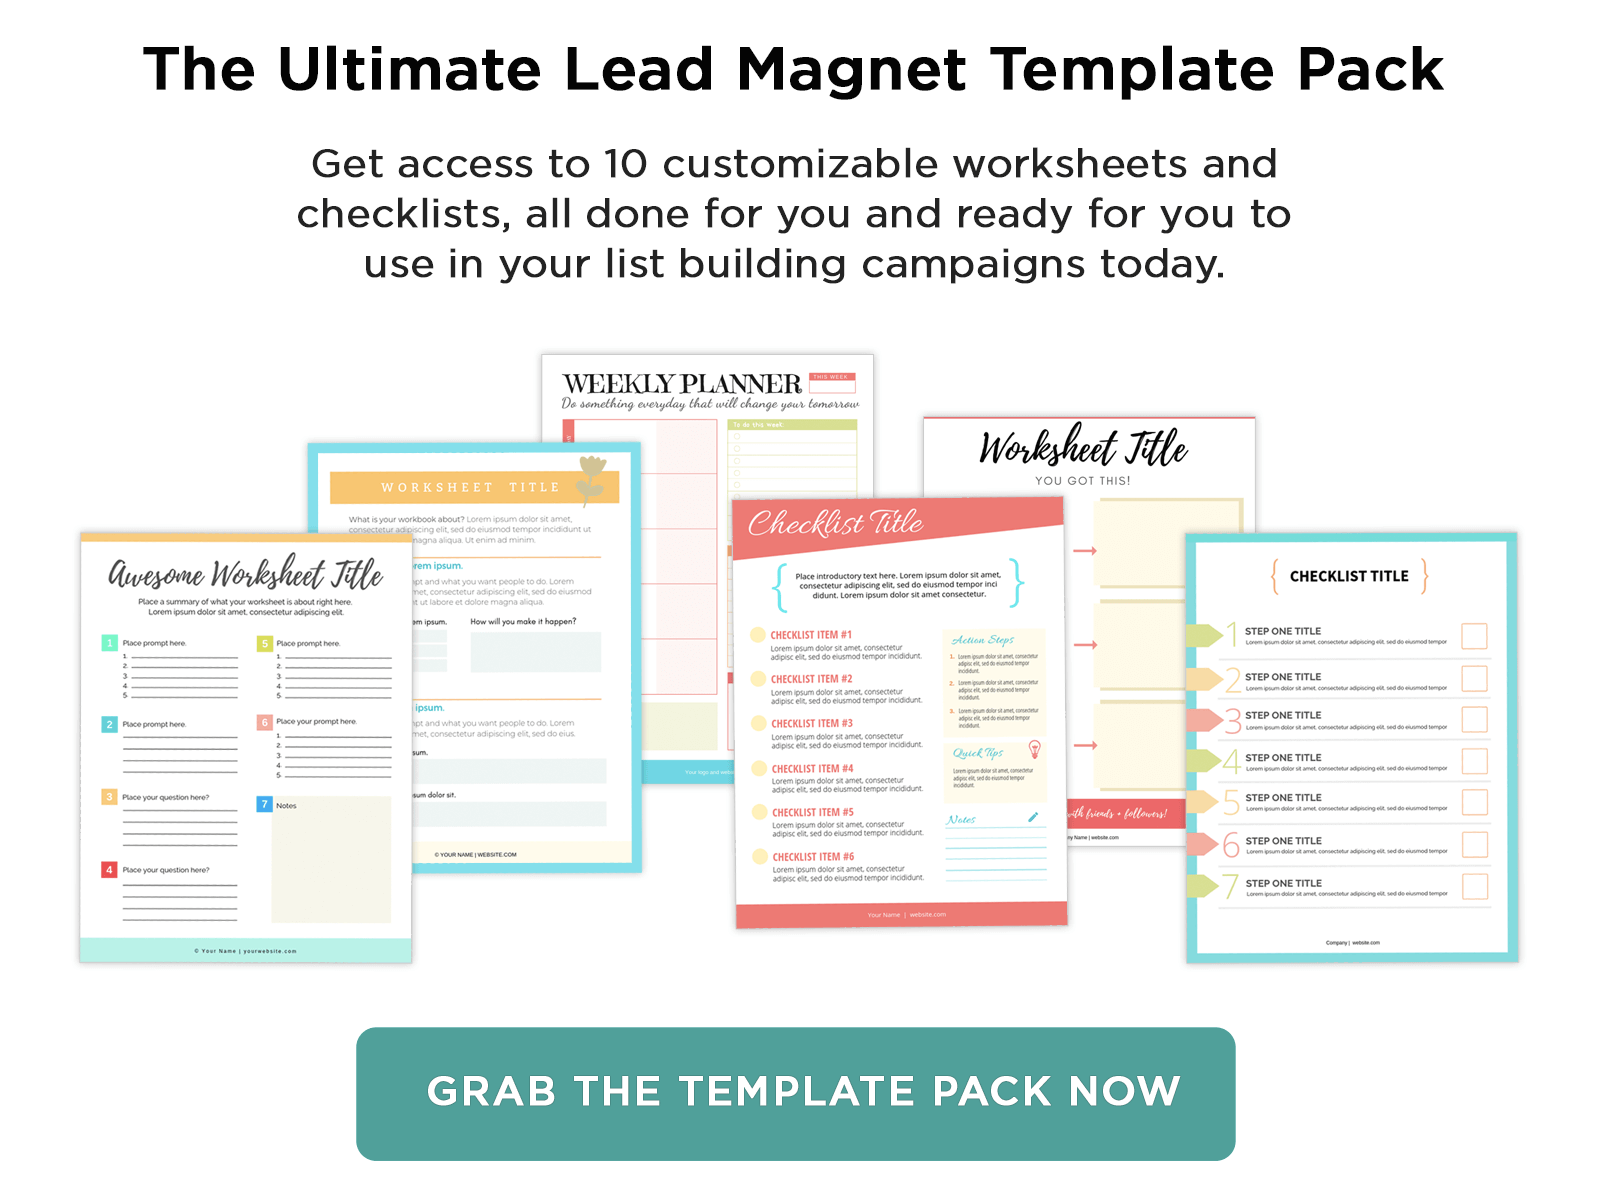 Download the Lead Magnet Template Pack